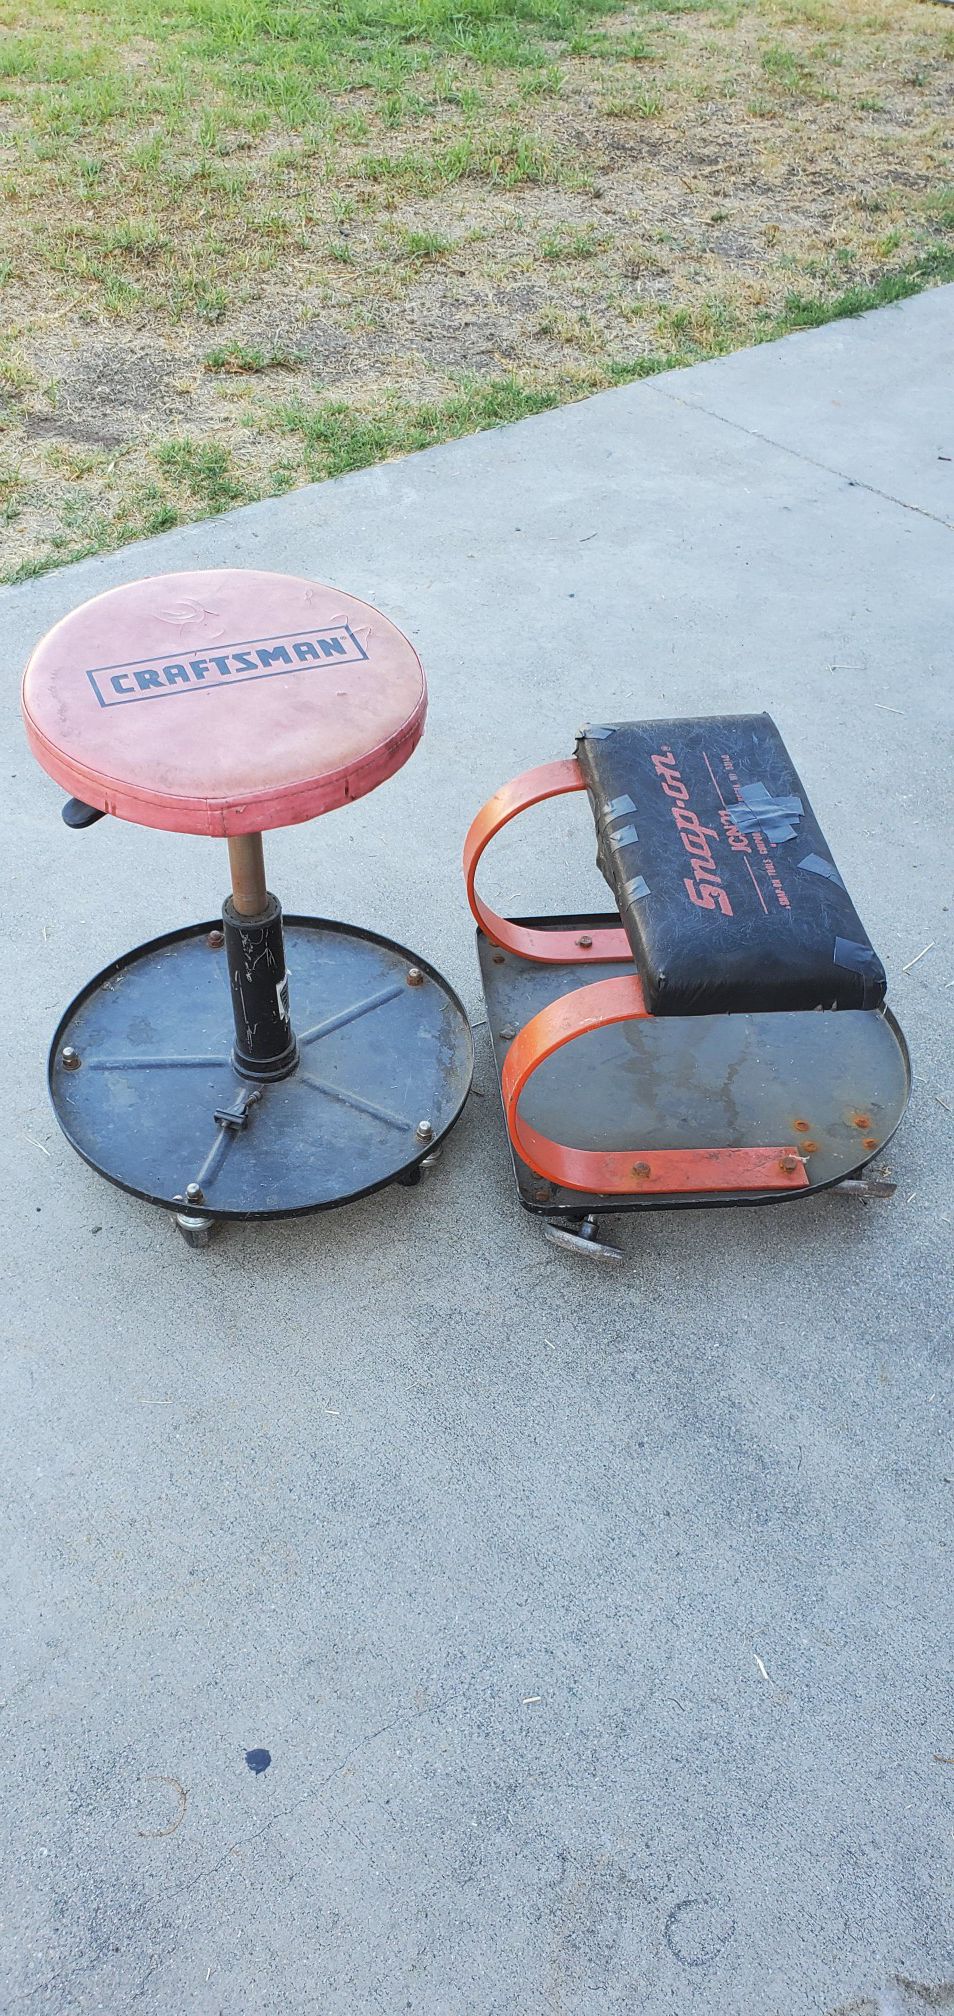 Snap on snapon snap-on and craftsman stool seat creeper.